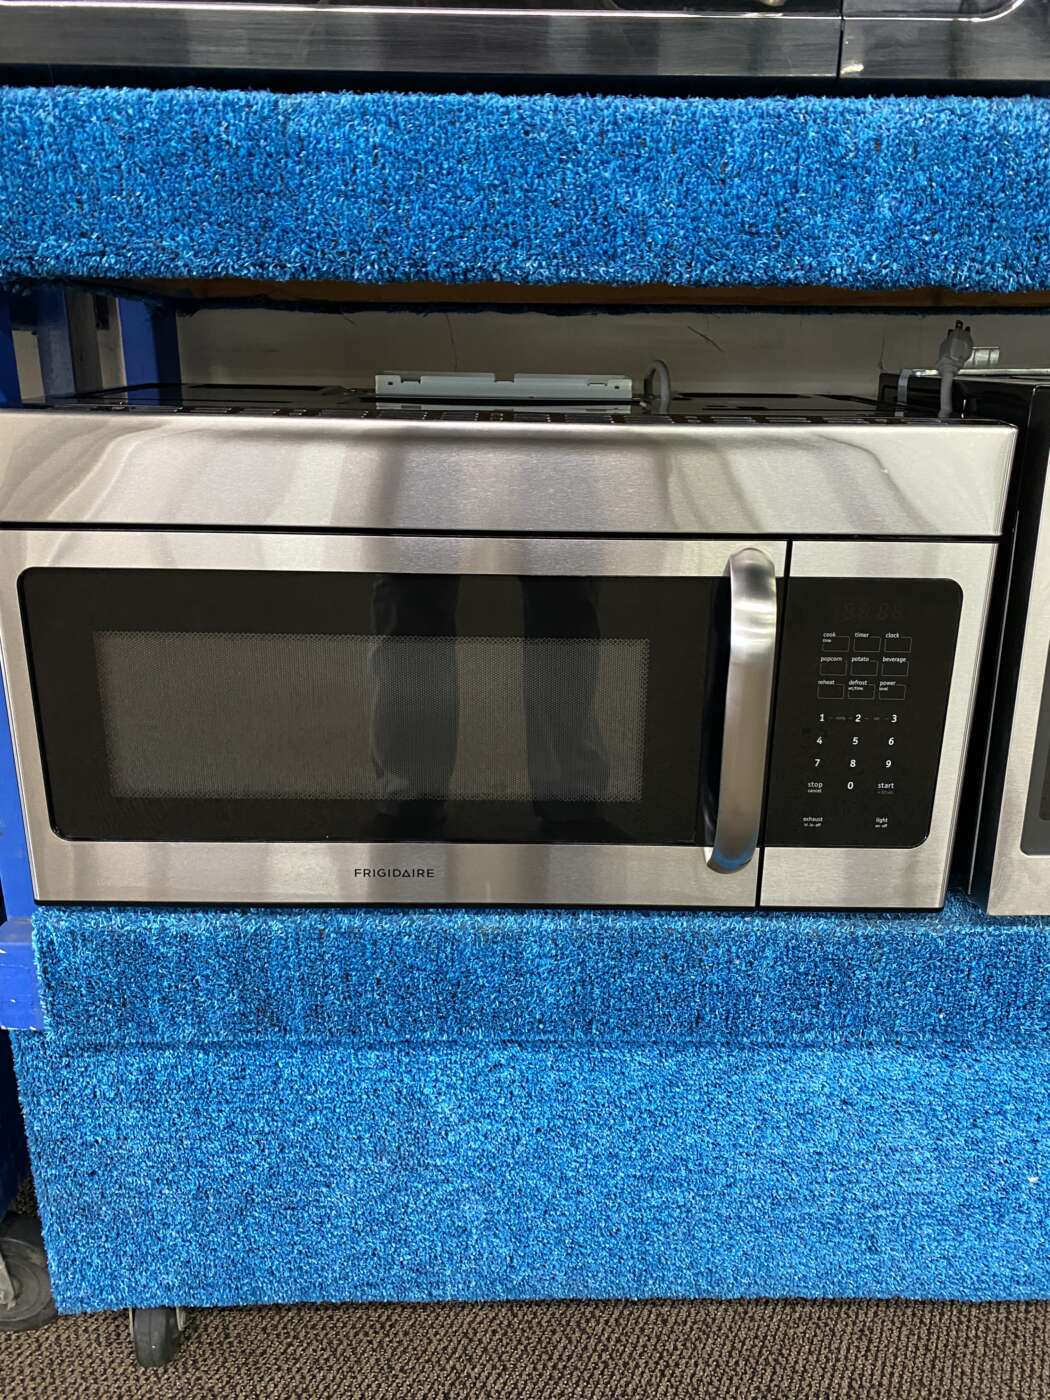 Reconditioned FRIGIDAIRE 1.6 Cu. Ft., 1000 Watt OTR Microwave – Stainless